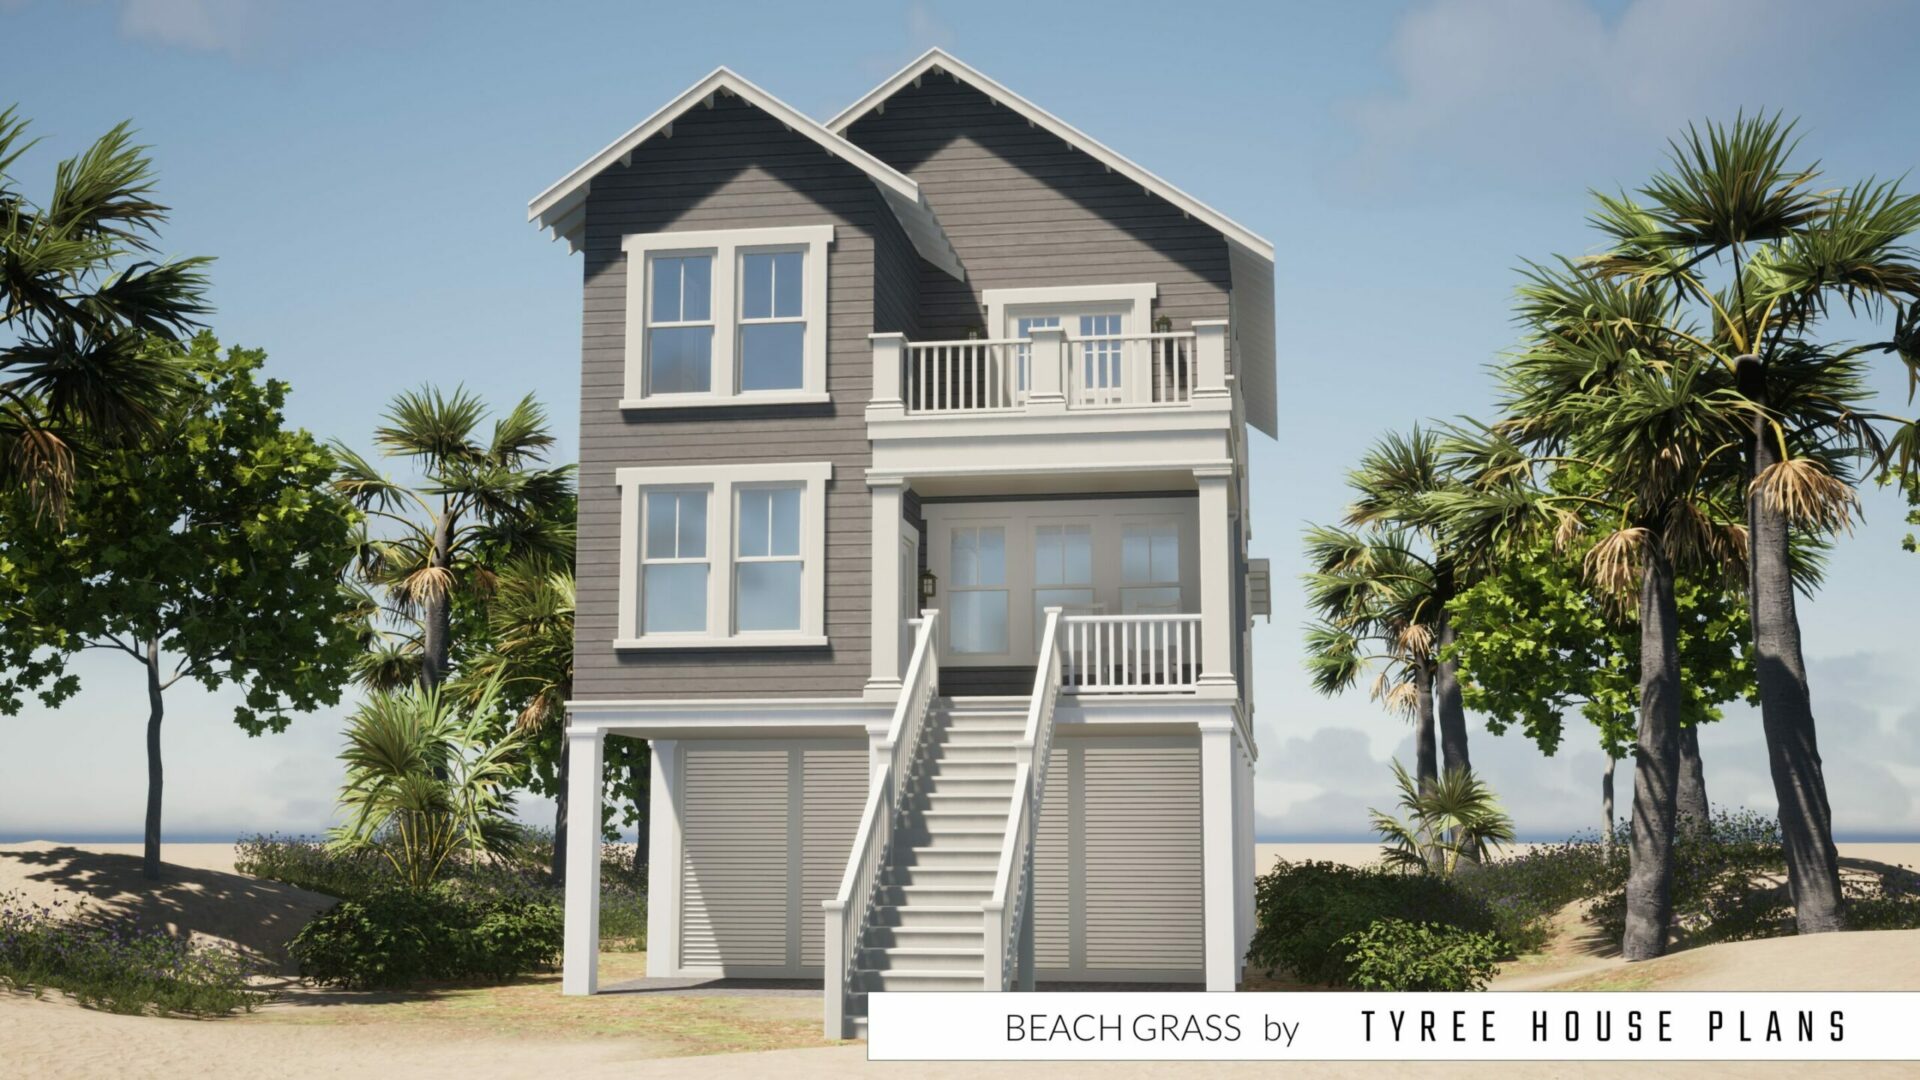 Beach Grass House Plan by Tyree House Plans